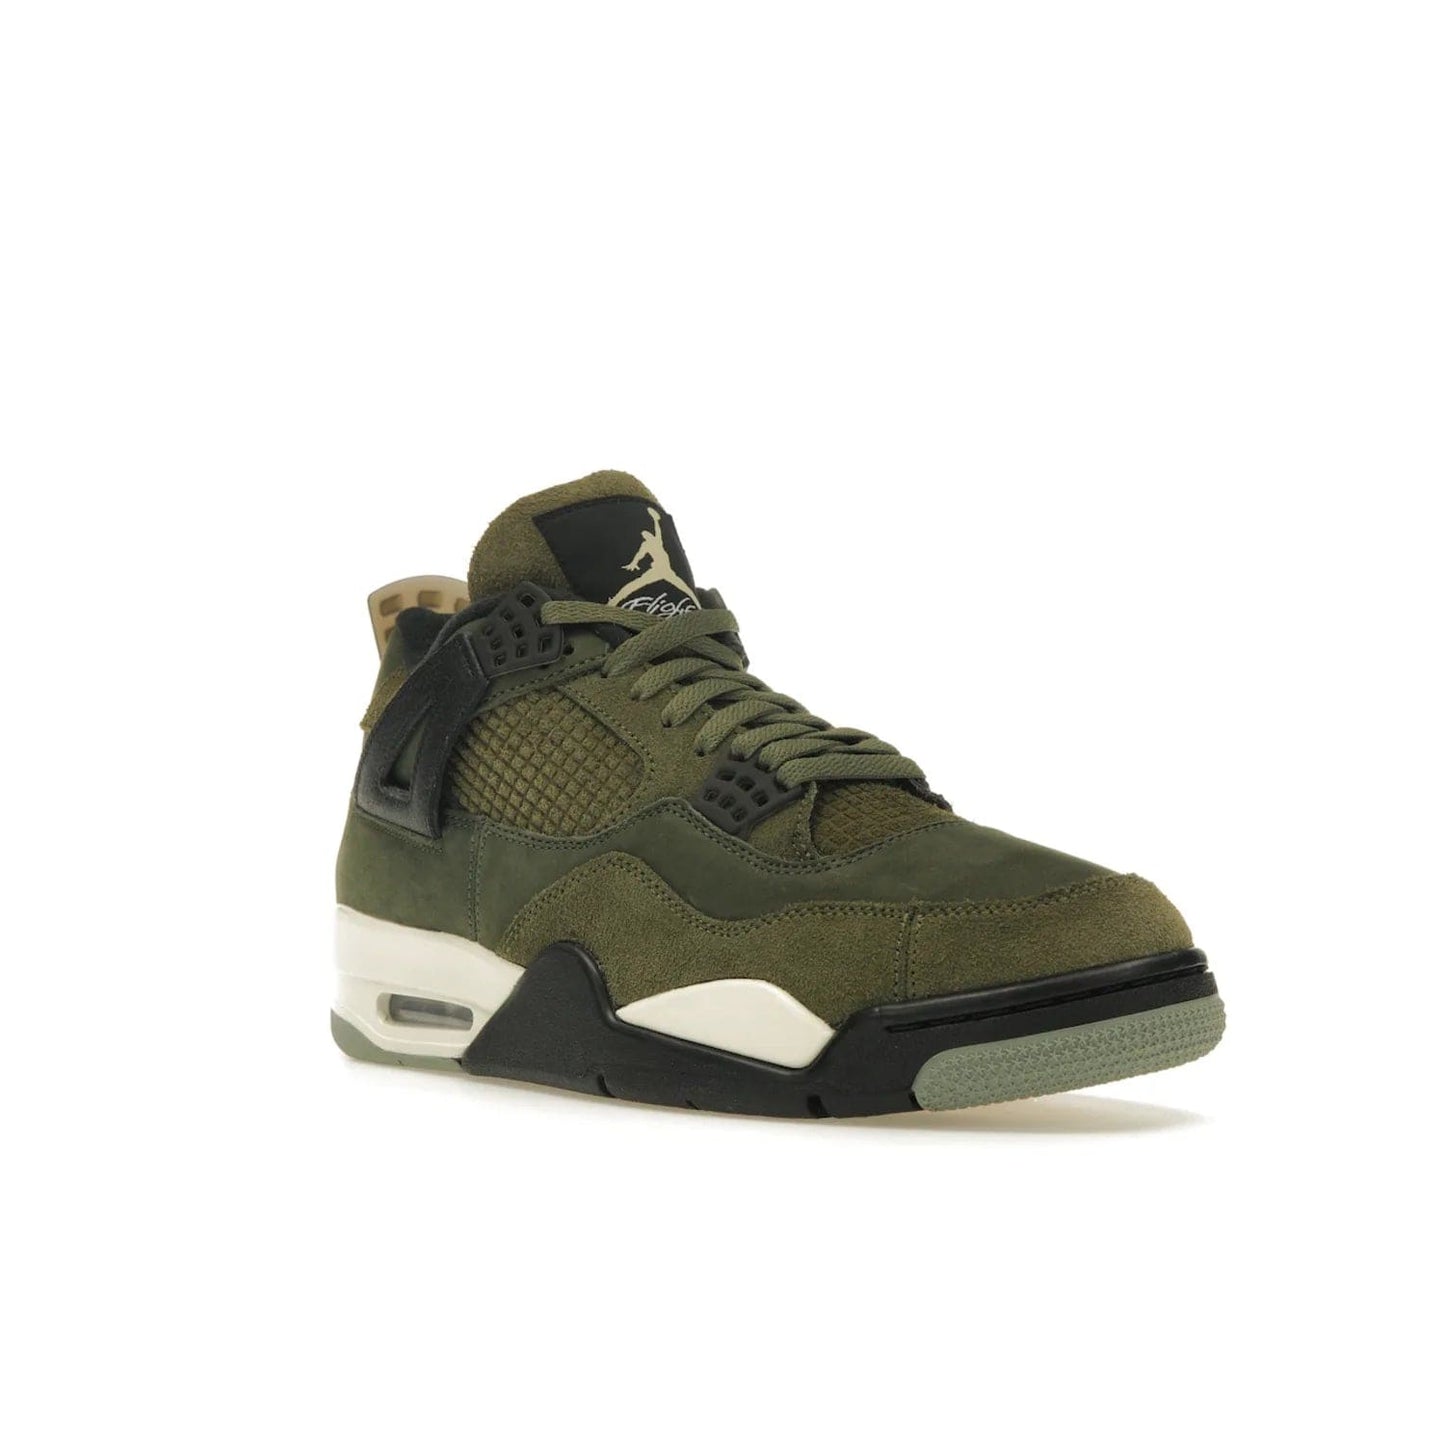 Jordan 4 Retro SE Craft Medium Olive - Image 6 - Only at www.BallersClubKickz.com - Grab the Jordan 4 Retro SE Crafts for a unique style. Combines Medium Olive, Pale Vanilla, Khaki, Black and Sail, with same classic shape, cushioning, and rubber outsole. Available on November 18th!